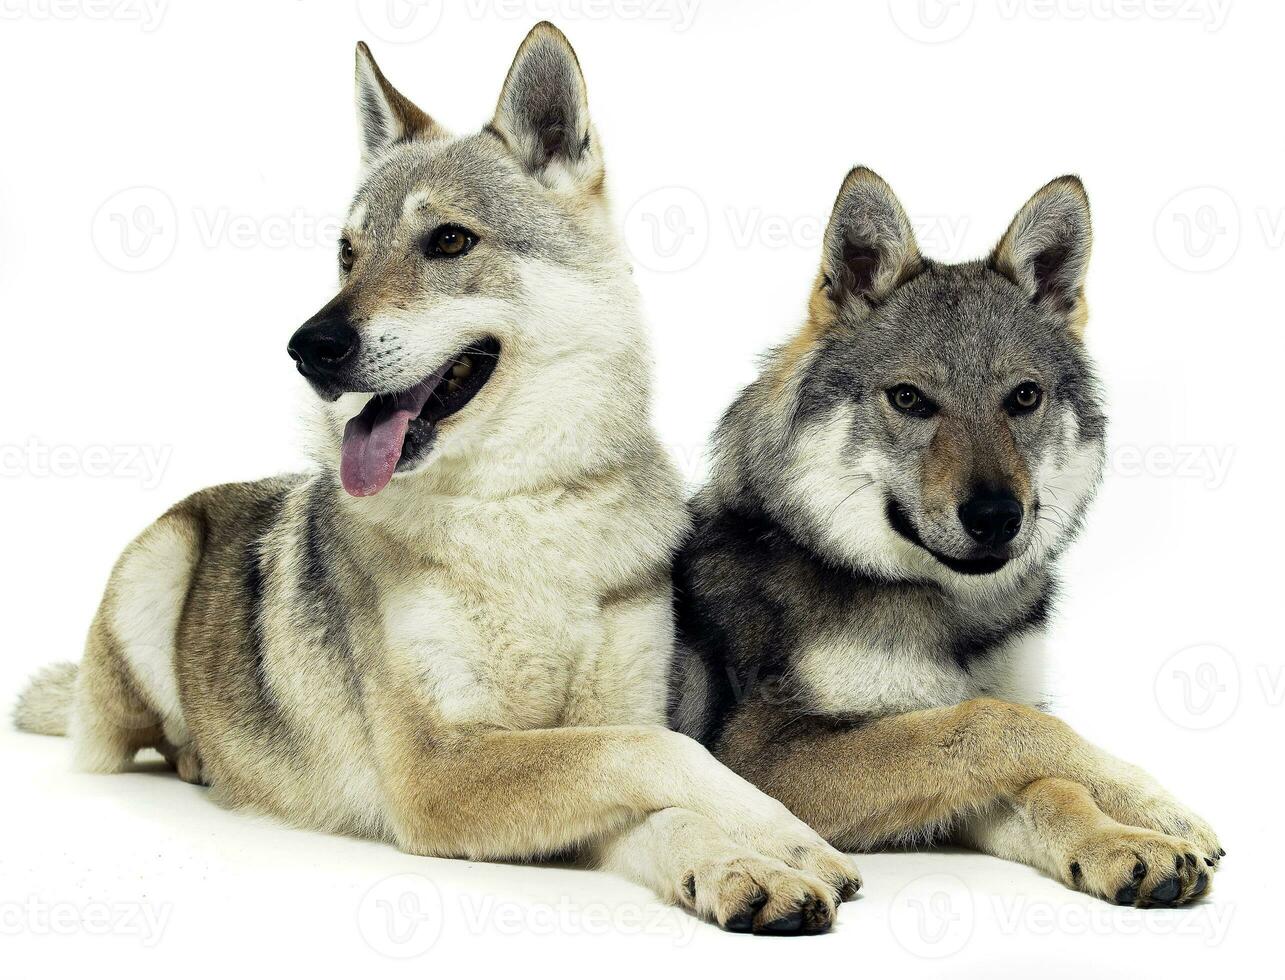 Czech wolfs are relaxing on the white floor photo